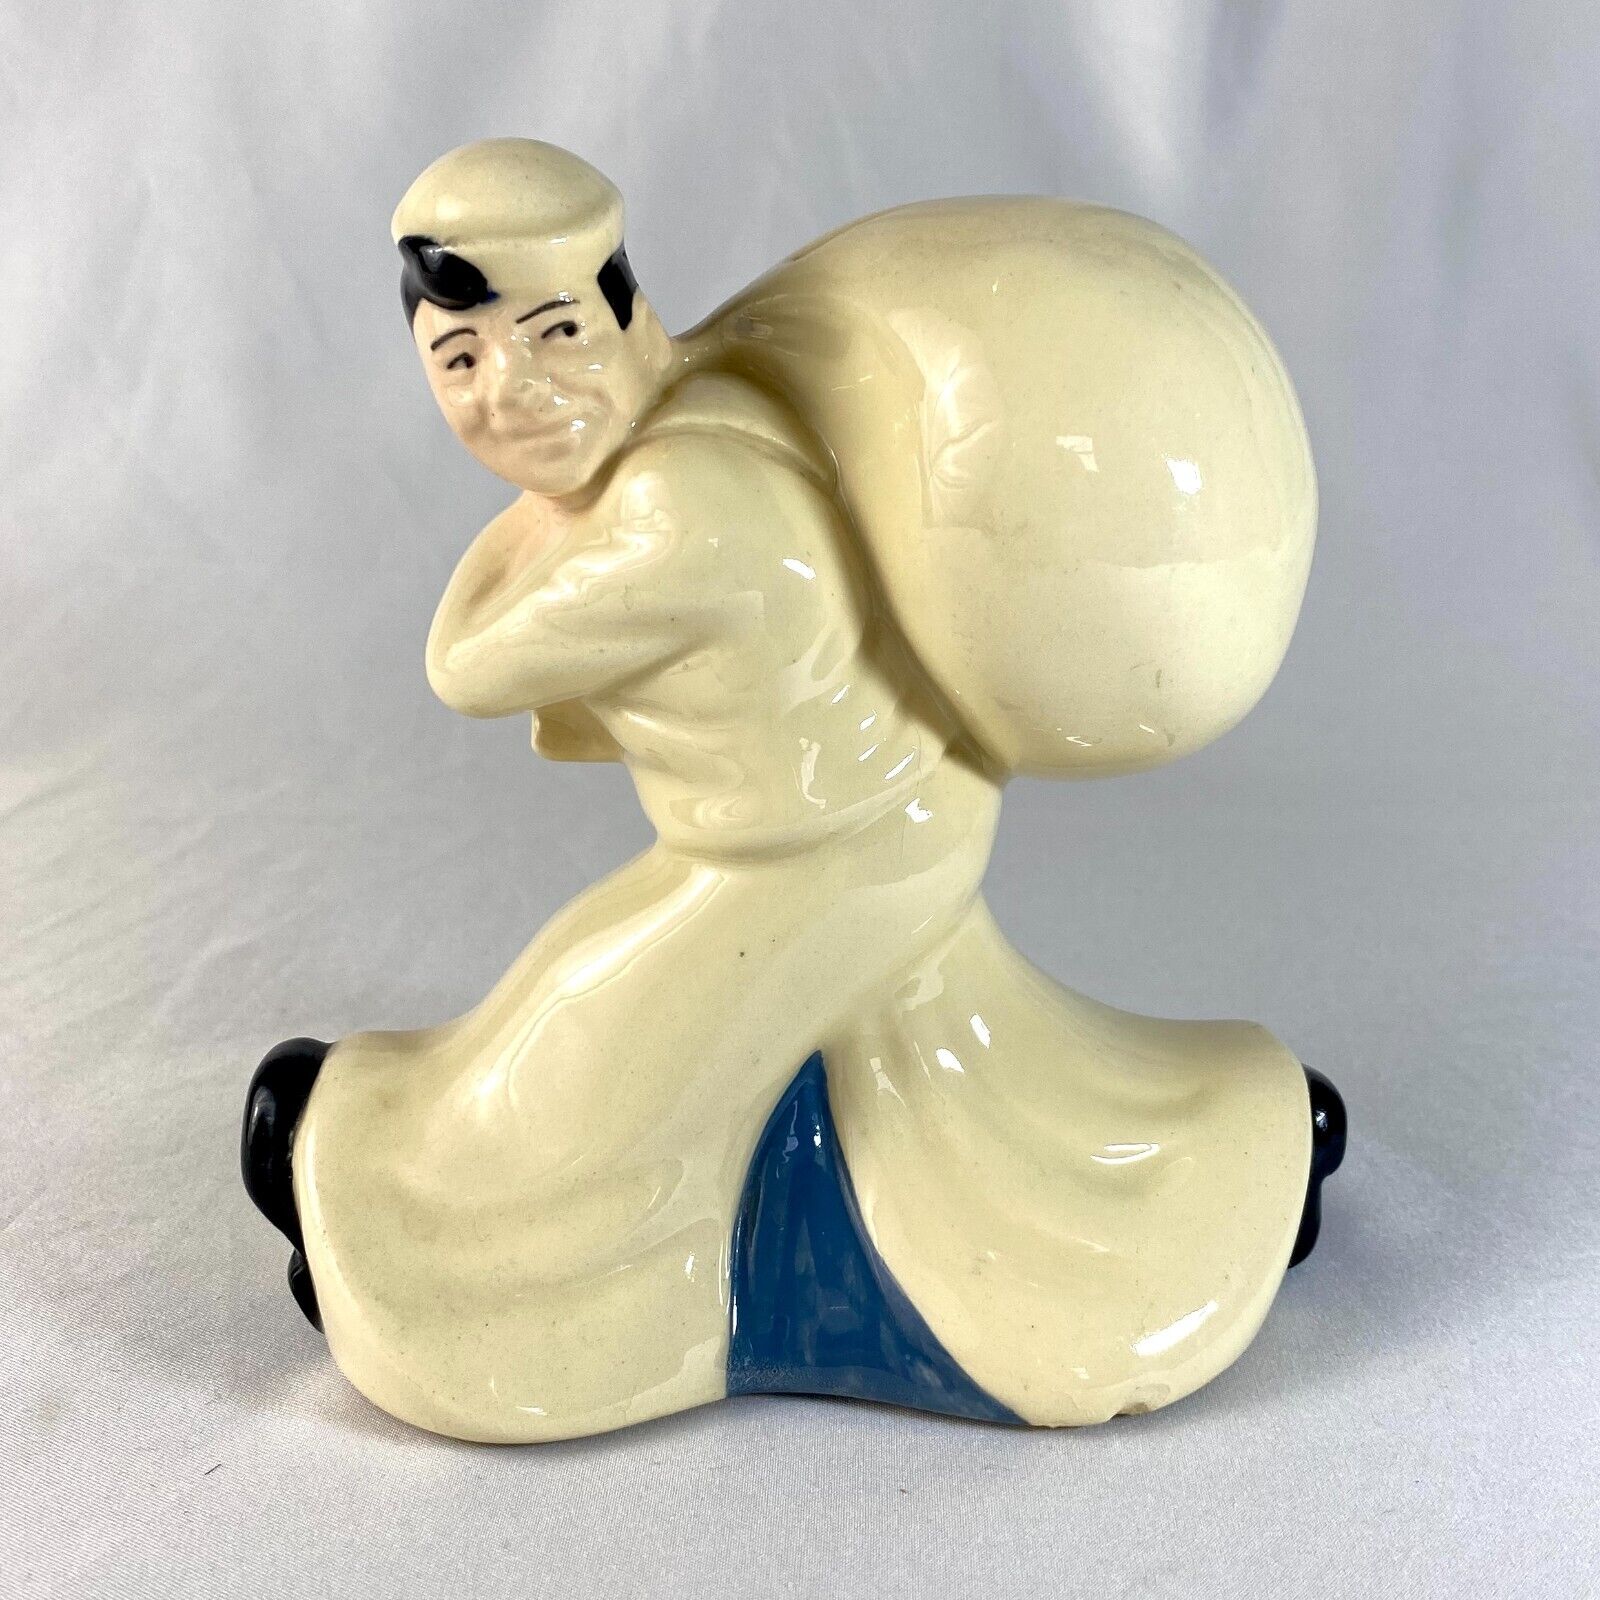 Vintage WWII Coin Bank by McCoy The Seaman's Bank For Savings Sailor